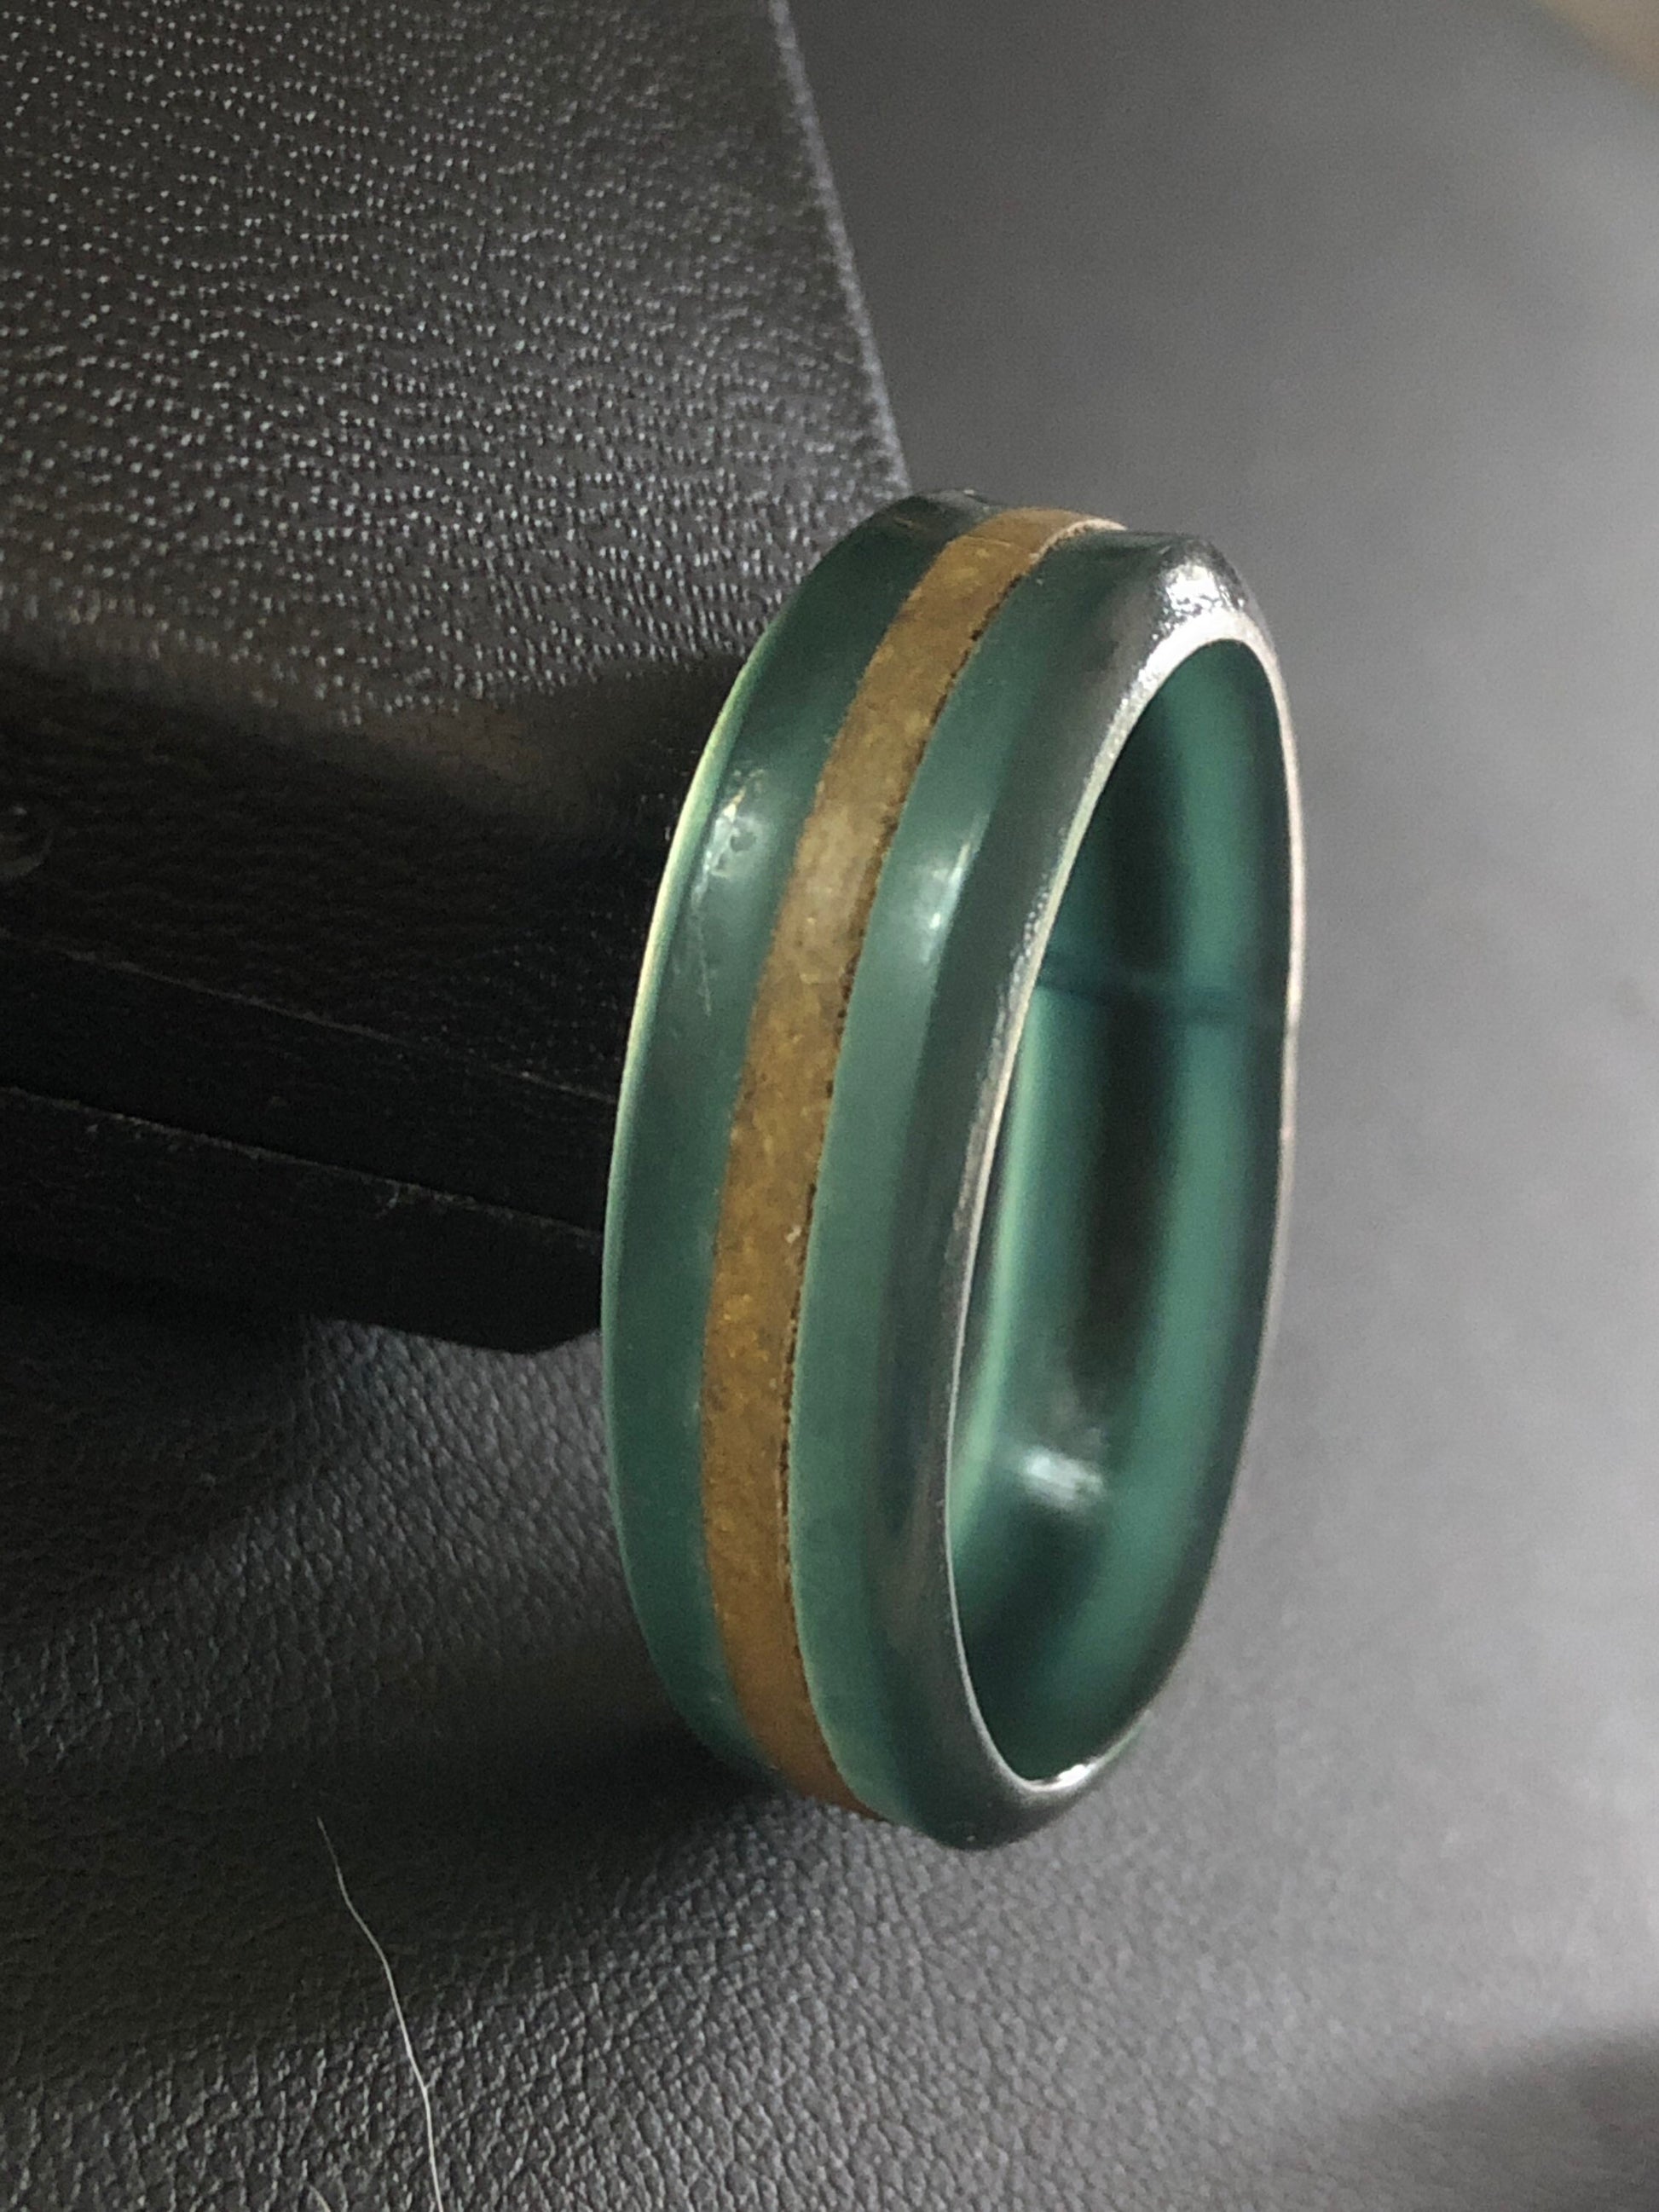 Art Deco Celluloid Early Plastic Scarf Ring Dark green Gold tone band Bakelite